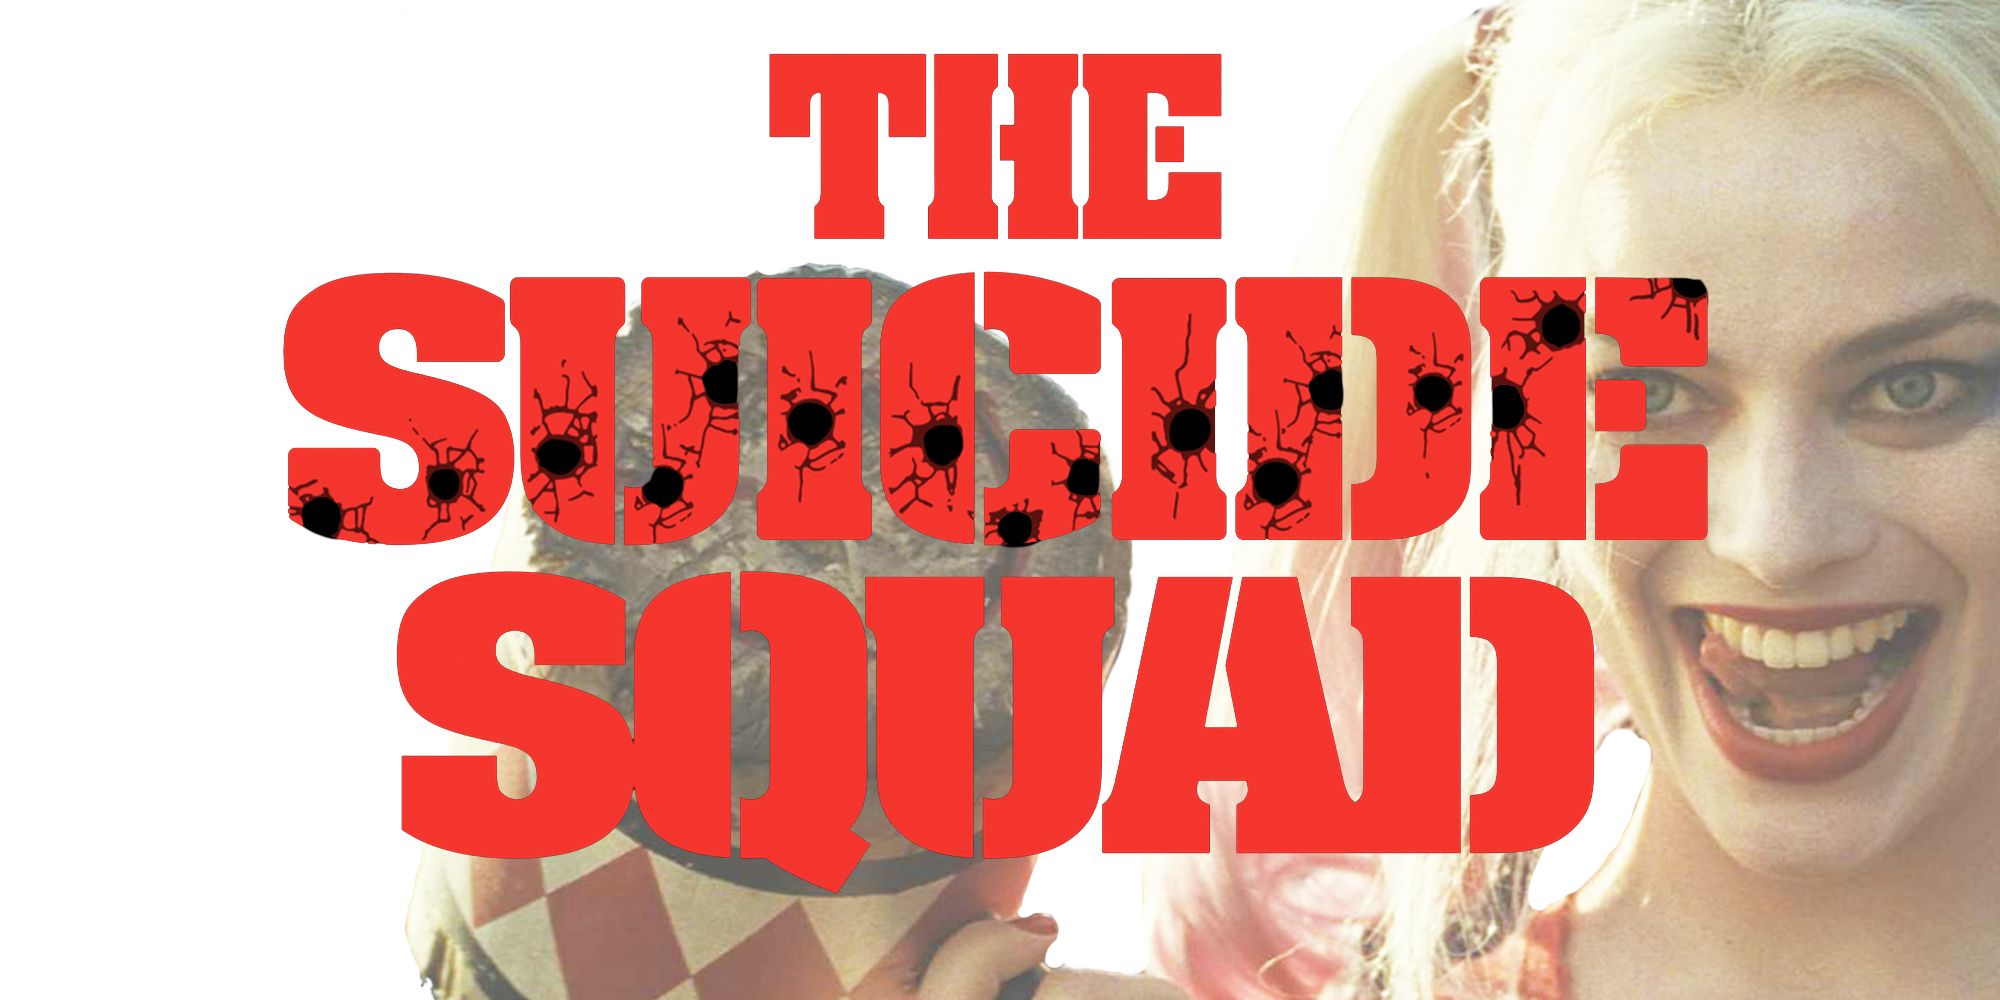 The Suicide Squad 2 logo superimposed over Margot Robbie as Harley Quinn